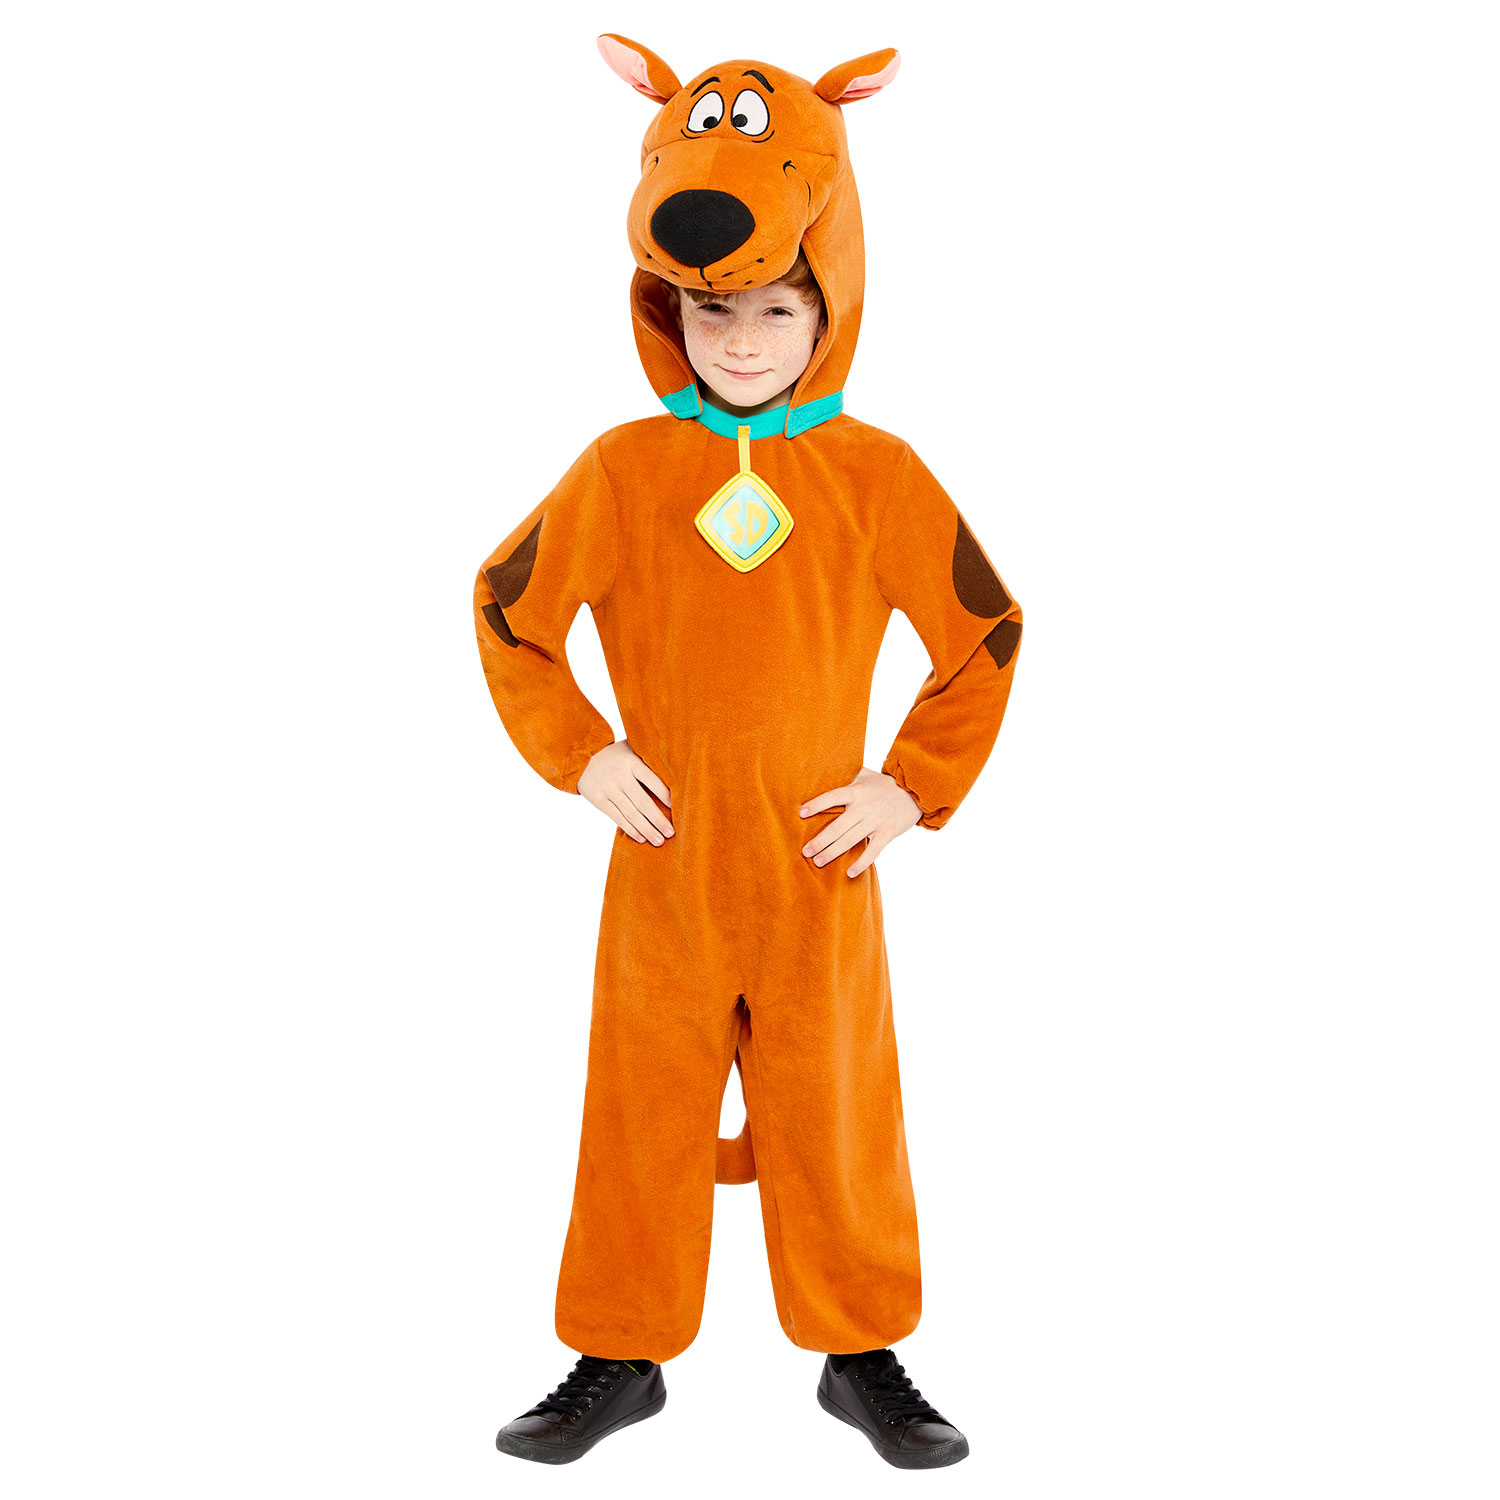 Scooby Doo Costume - Age 6-8 Years - 1 PC : Amscan International